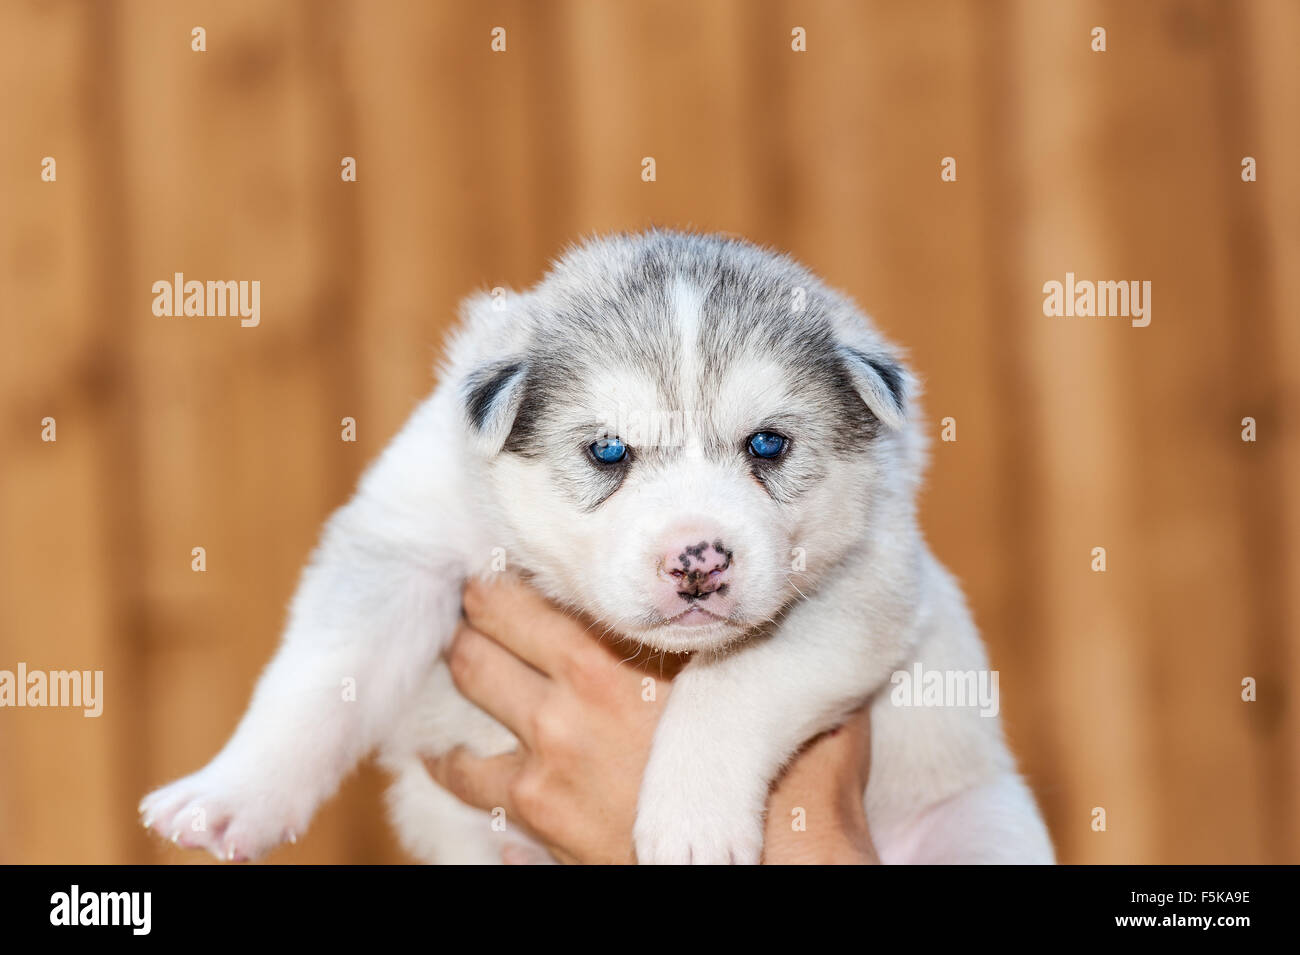 Newborn Husky Puppy High Resolution Stock Photography and Images - Alamy